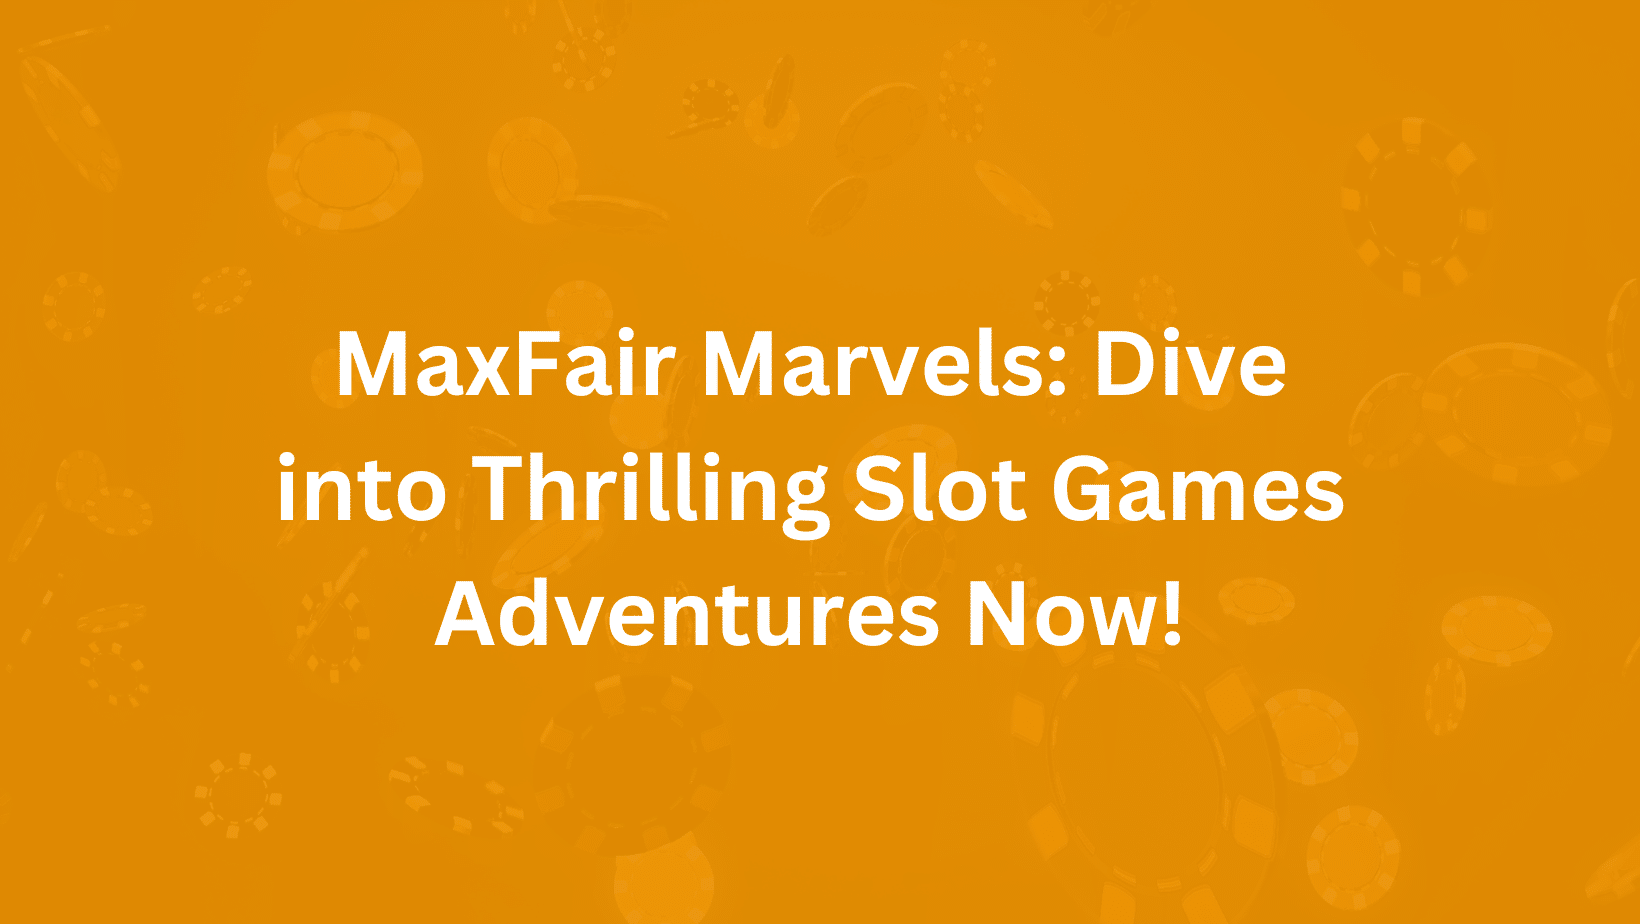 MaxFair Marvels Dive into Thrilling Slot Games Adventures Now